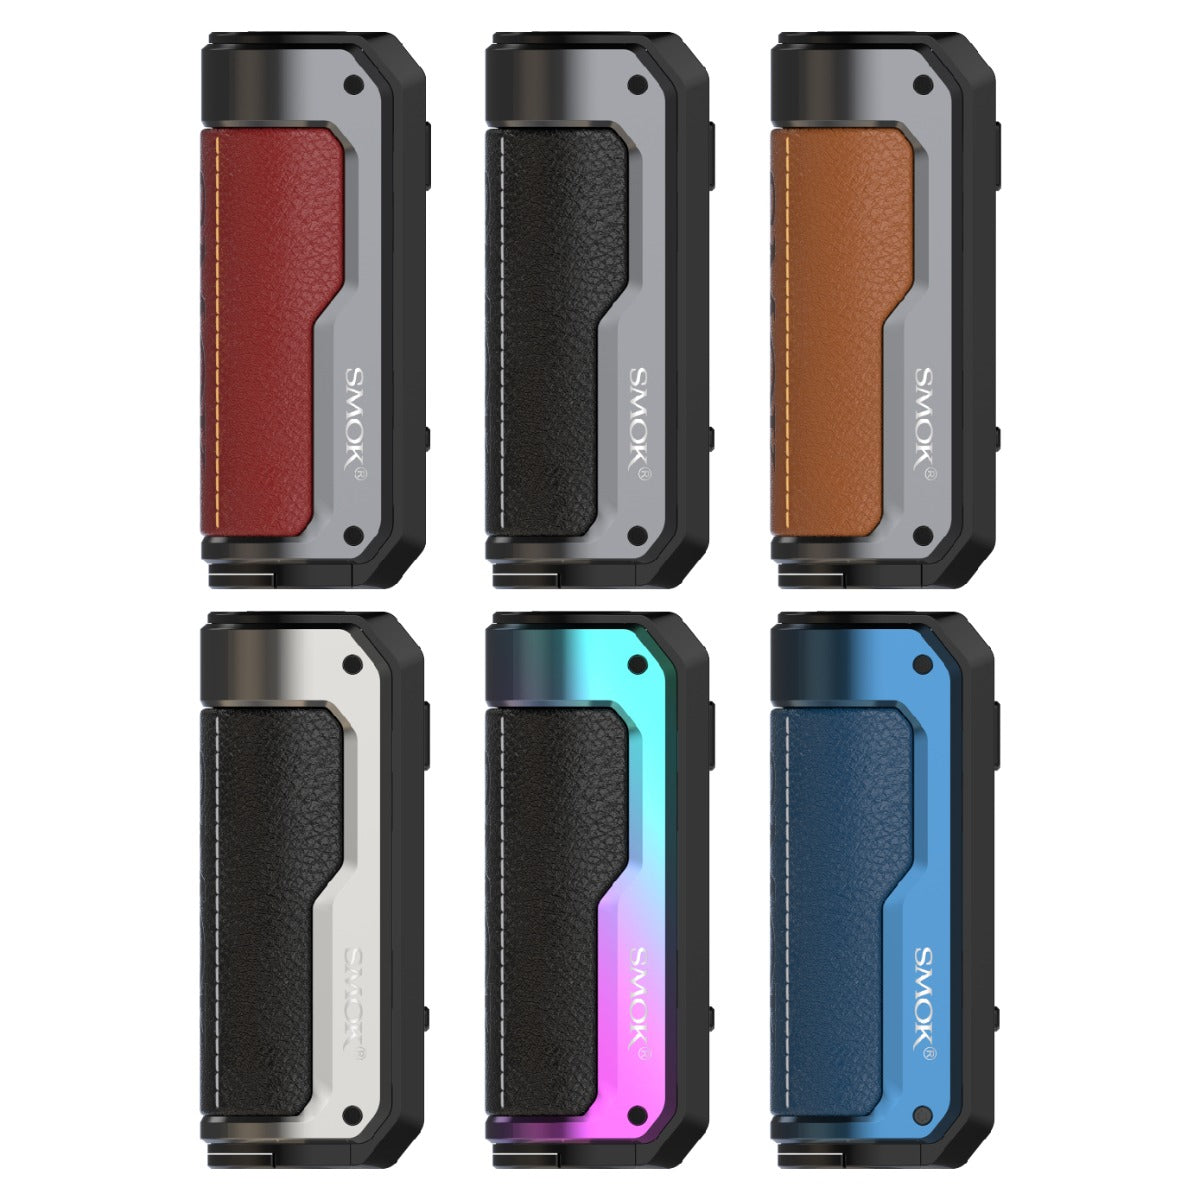 SMOK Fortis 100w Box Mod Best Colors